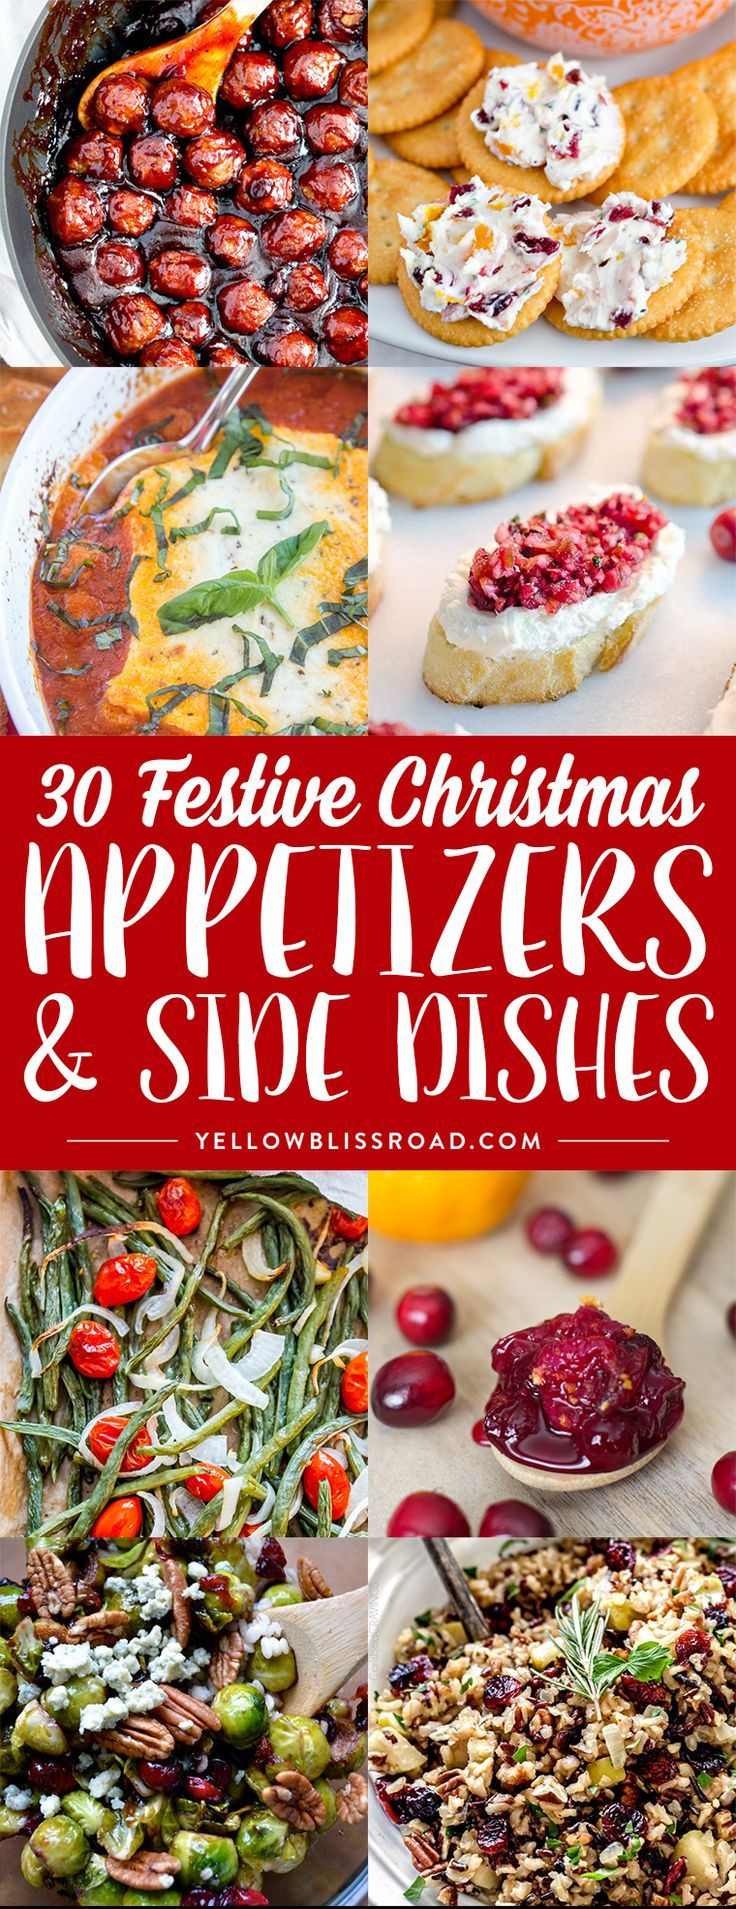 Christmas Dinner Appetizers
 25 best ideas about Christmas Appetizers on Pinterest